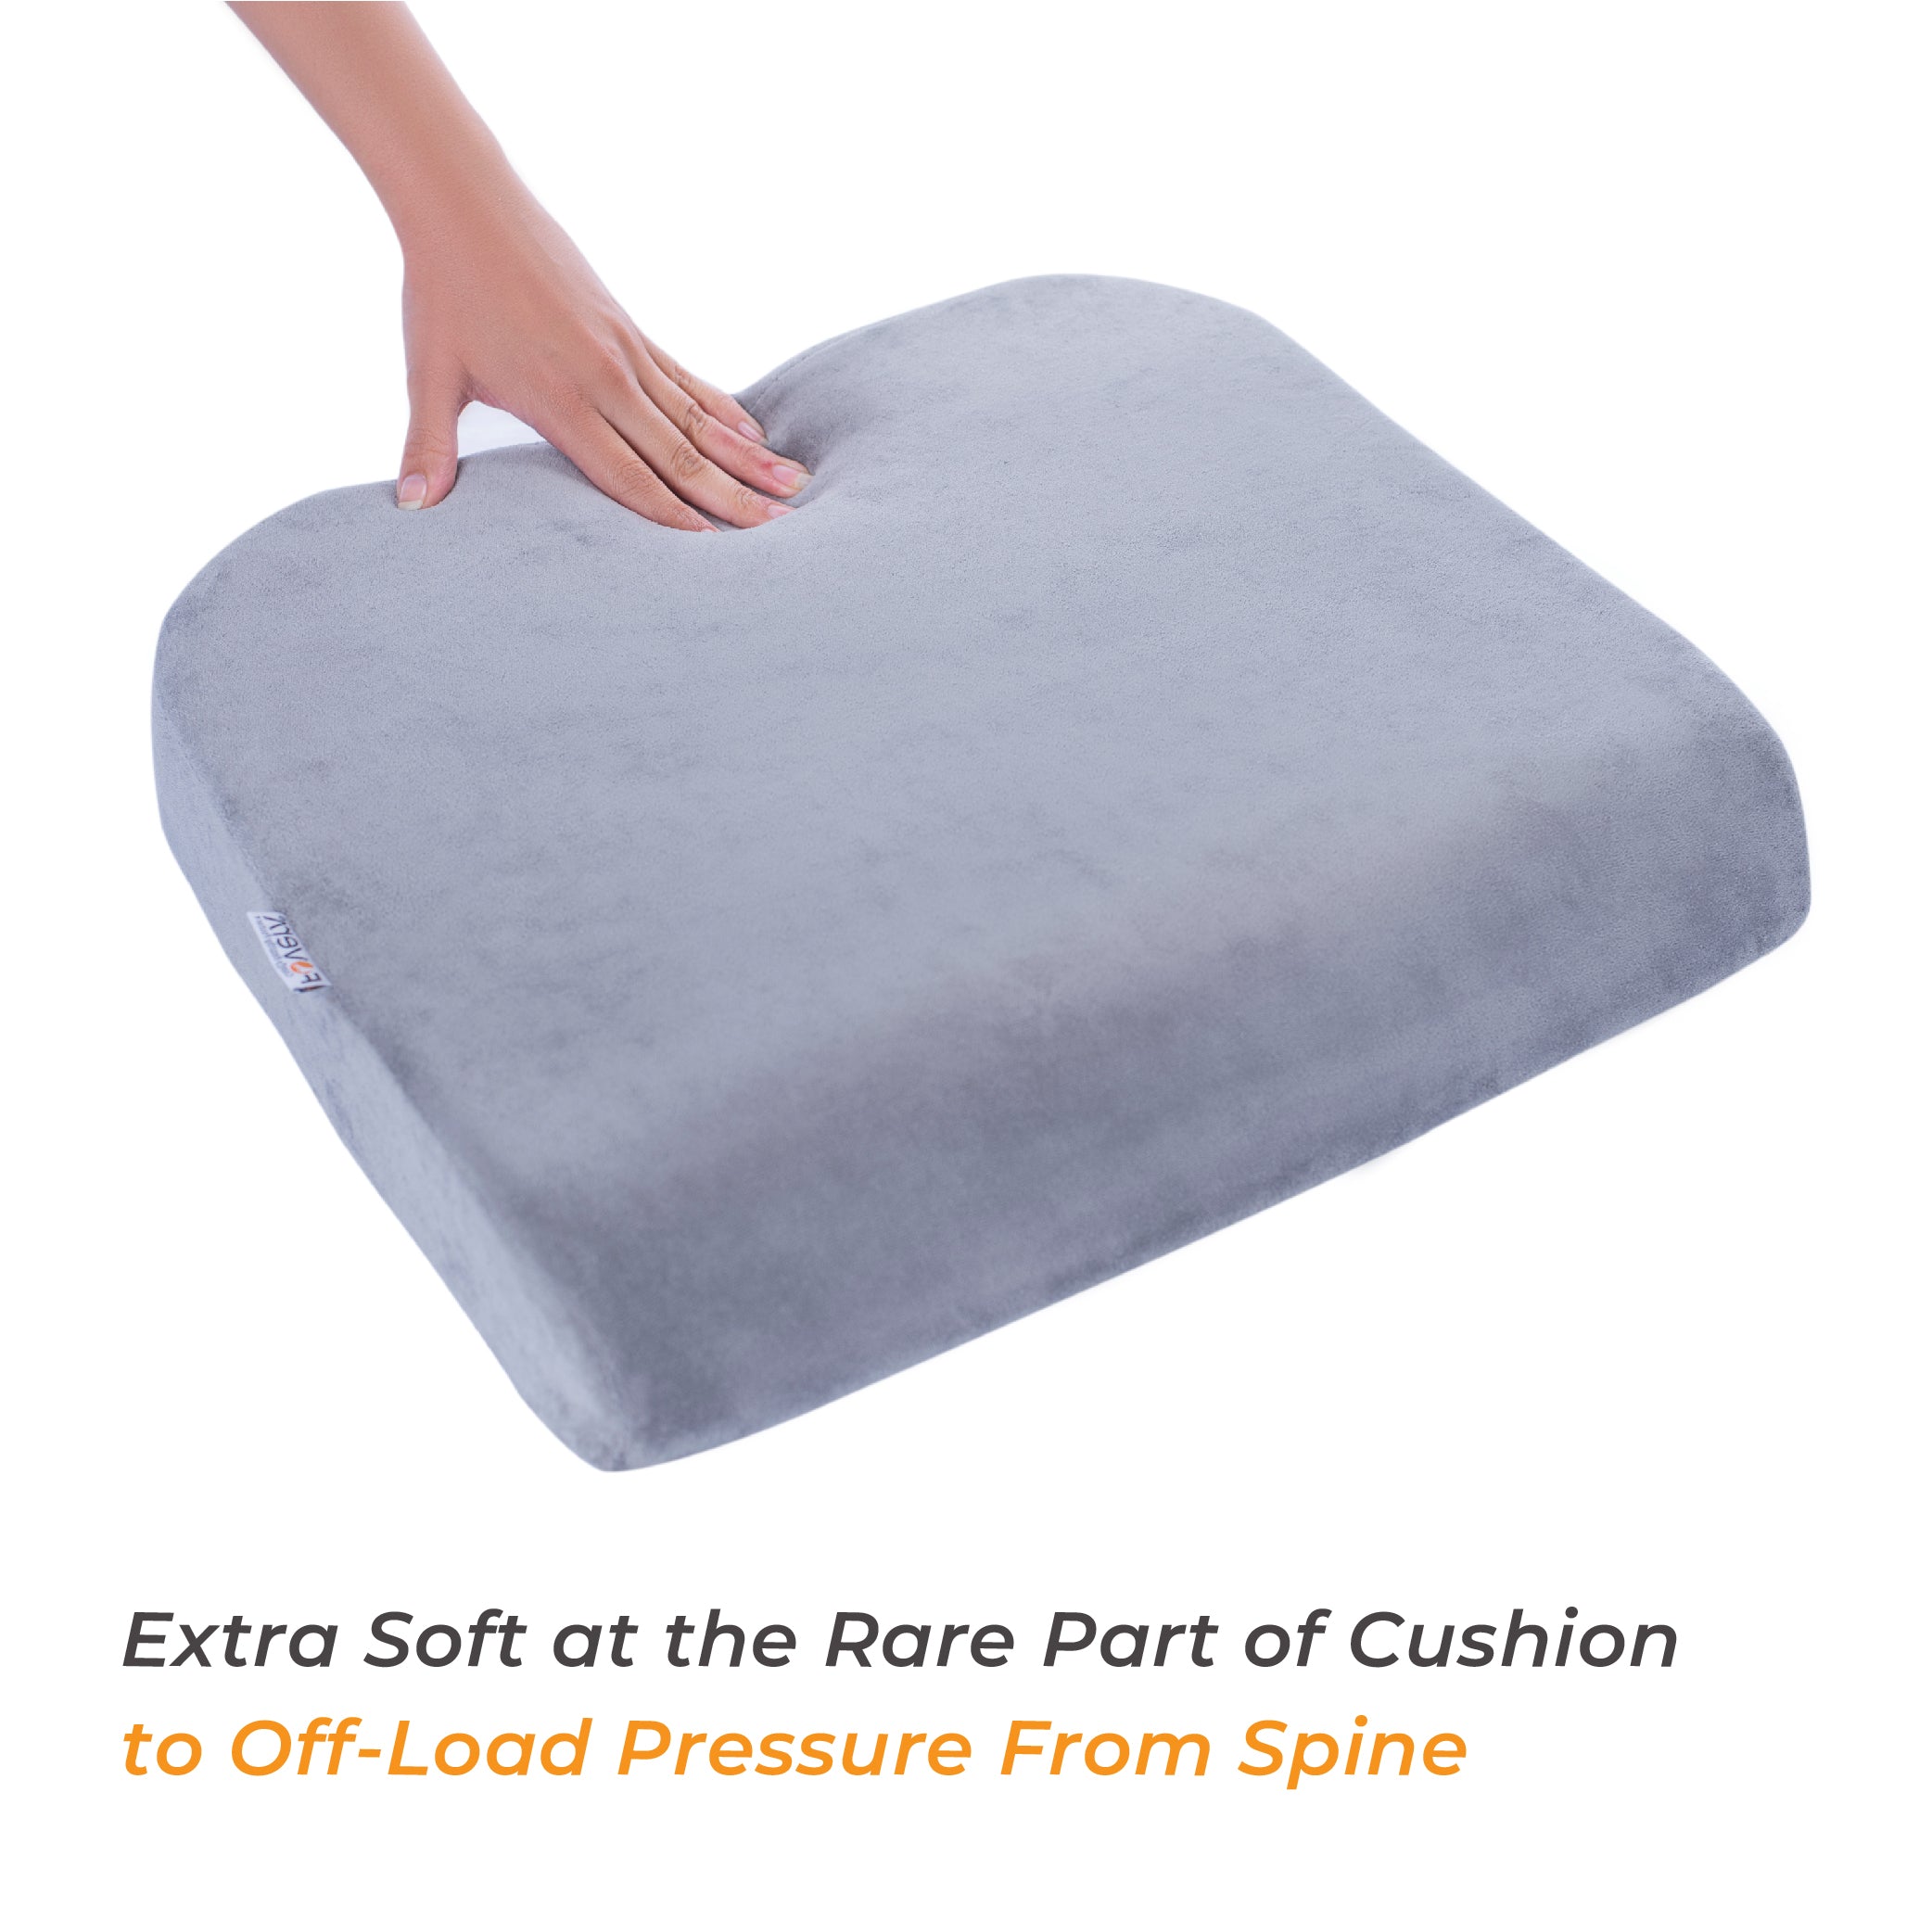 COMFYSURE XL Firm Seat Cushion Pad for Bariatric Overweight Users - On Sale  - Bed Bath & Beyond - 33545900